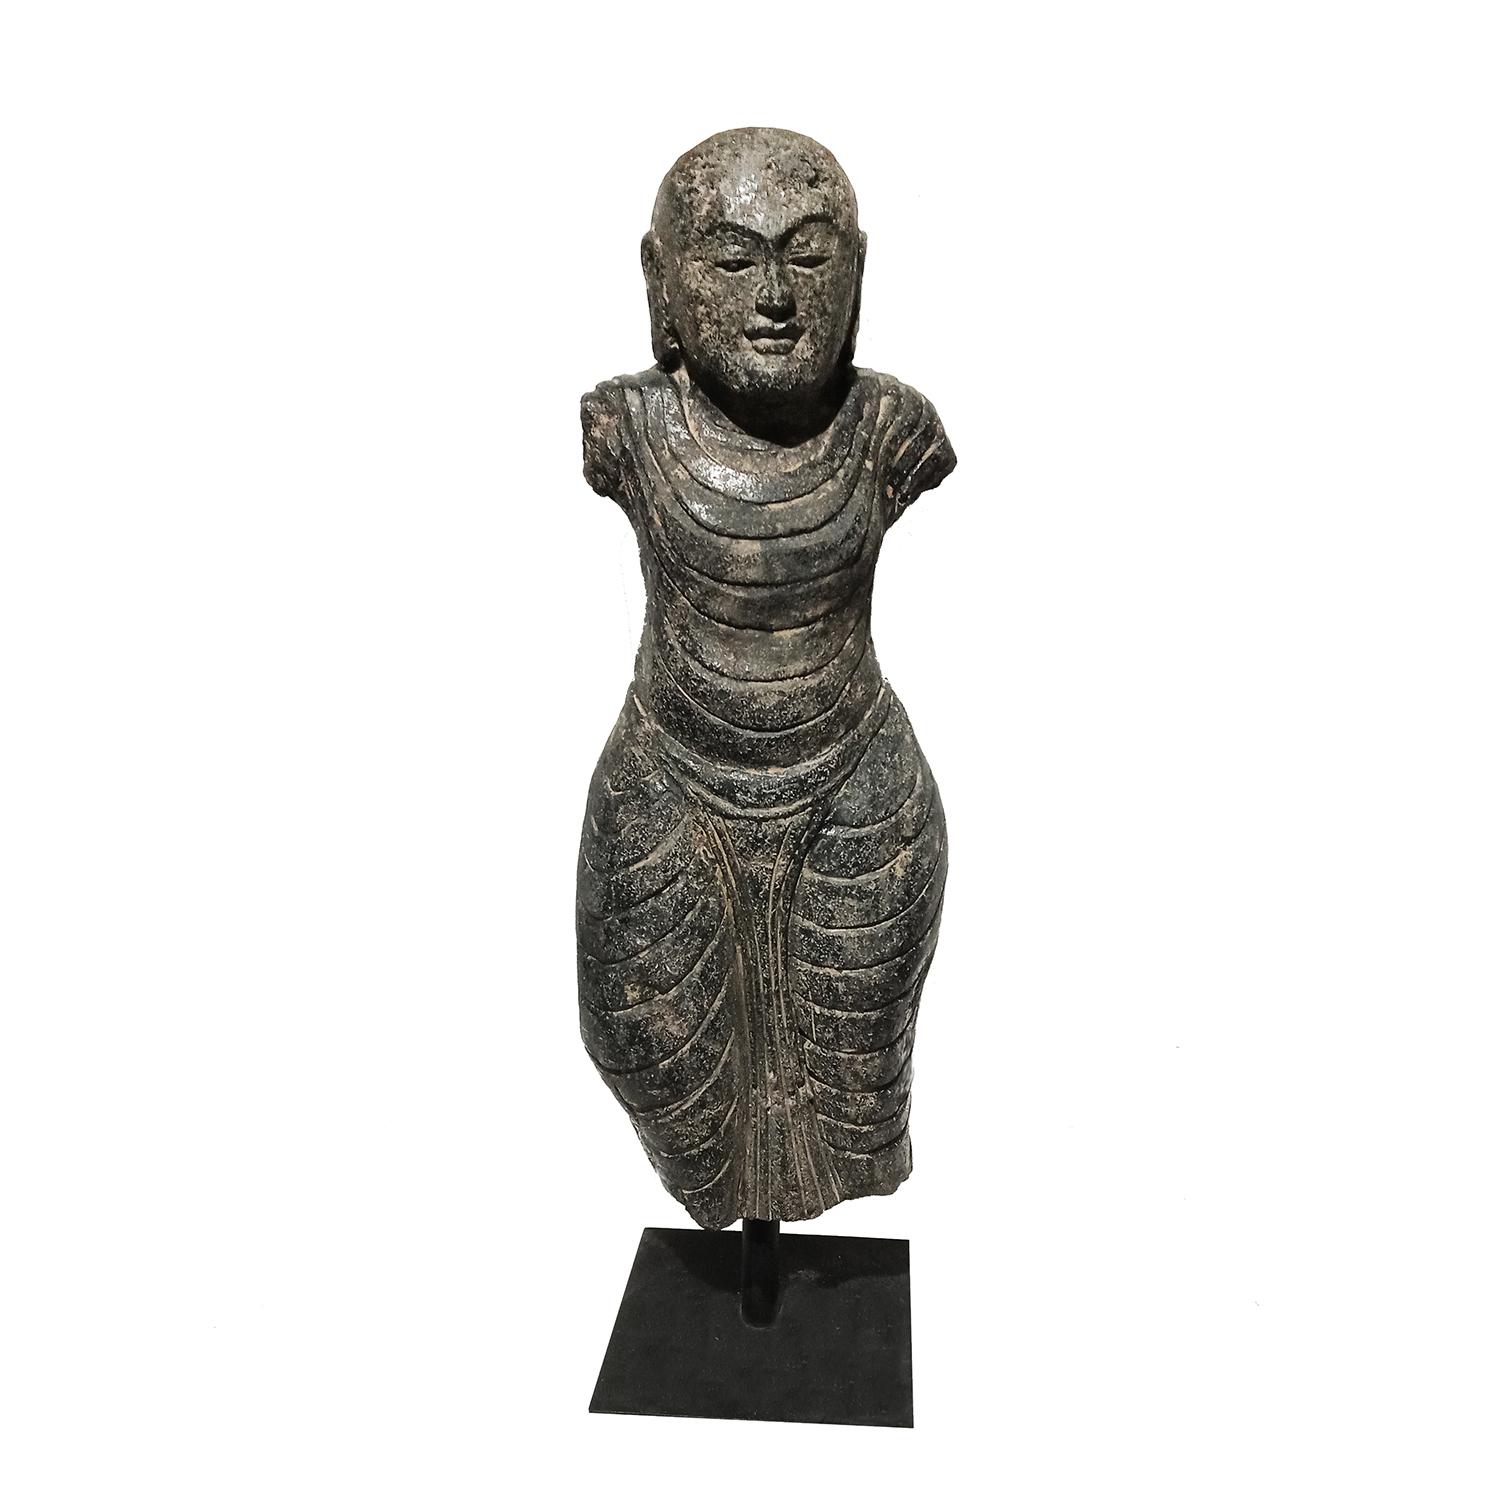 A volcanic black rock sculpture, hand-crafted in Indonesia, late 20th Century. Black Basalt, carved and polished. 

Depicting a torso in traditional attire, decorated throughout. Mounted on a black metal stand. Can be used indoors and outdoors.